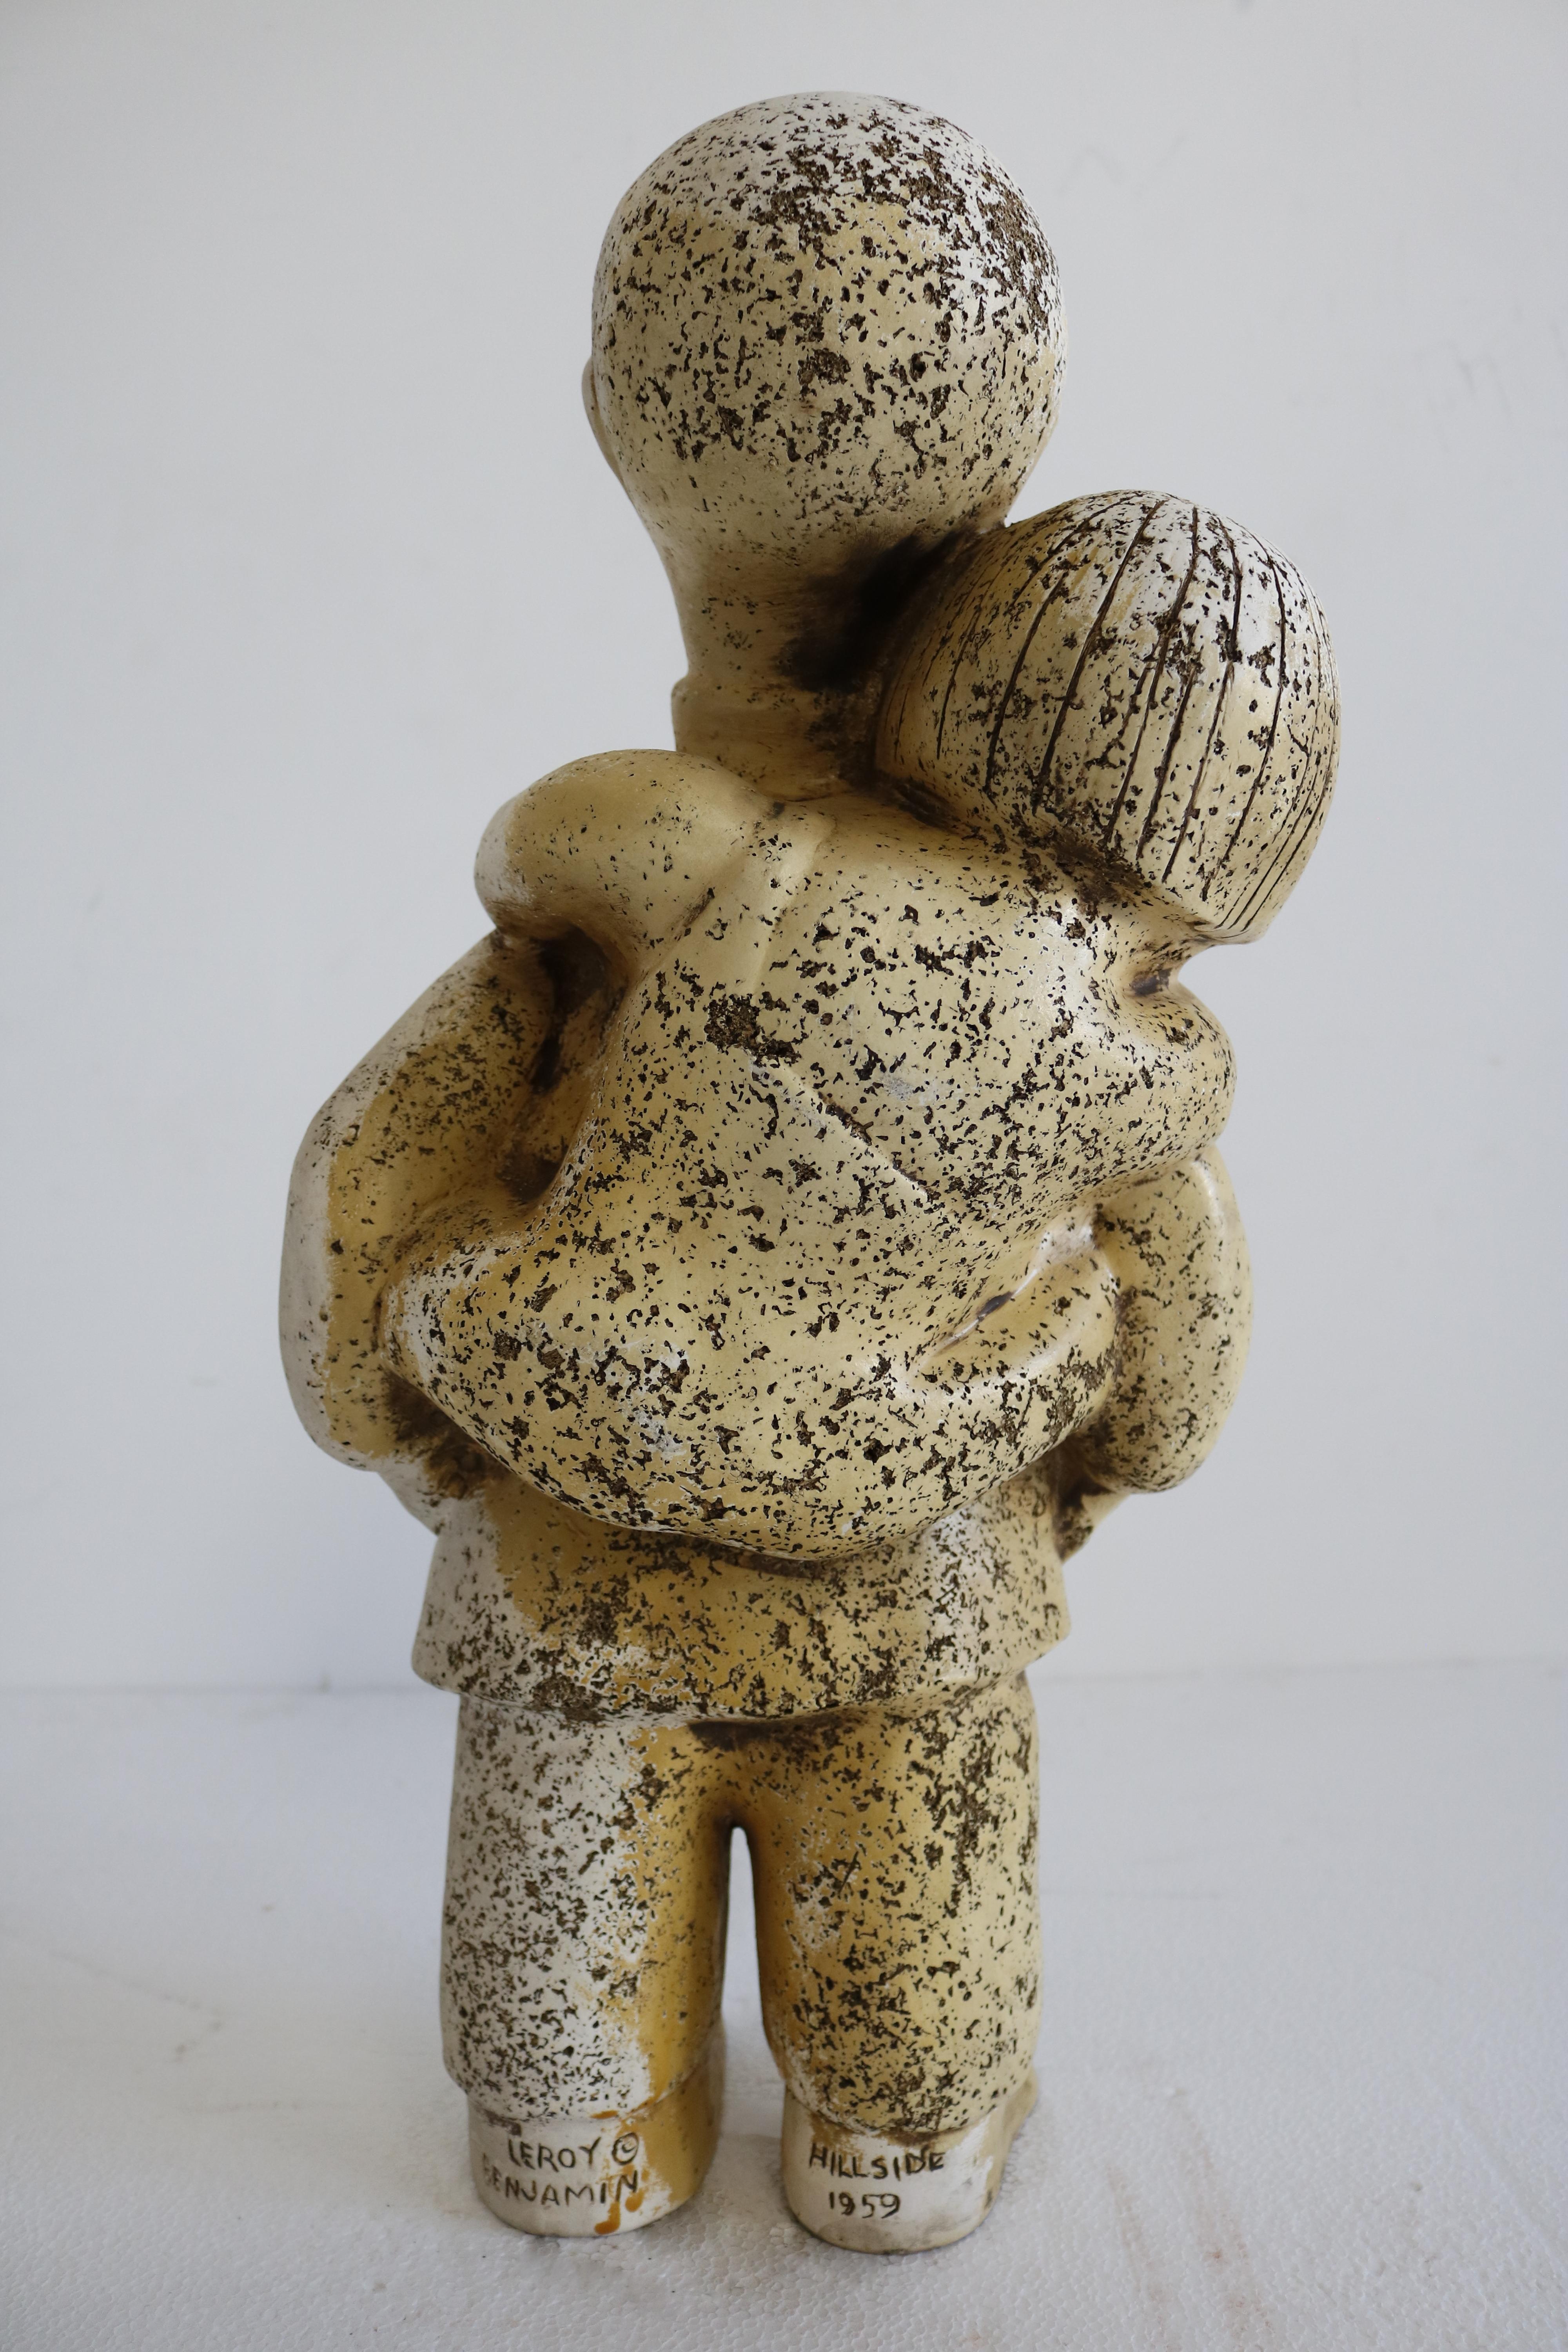 This ceramic sculpture features two people, a father with his daughter on his back in a warm embrace and smiling. Signed on bottom 